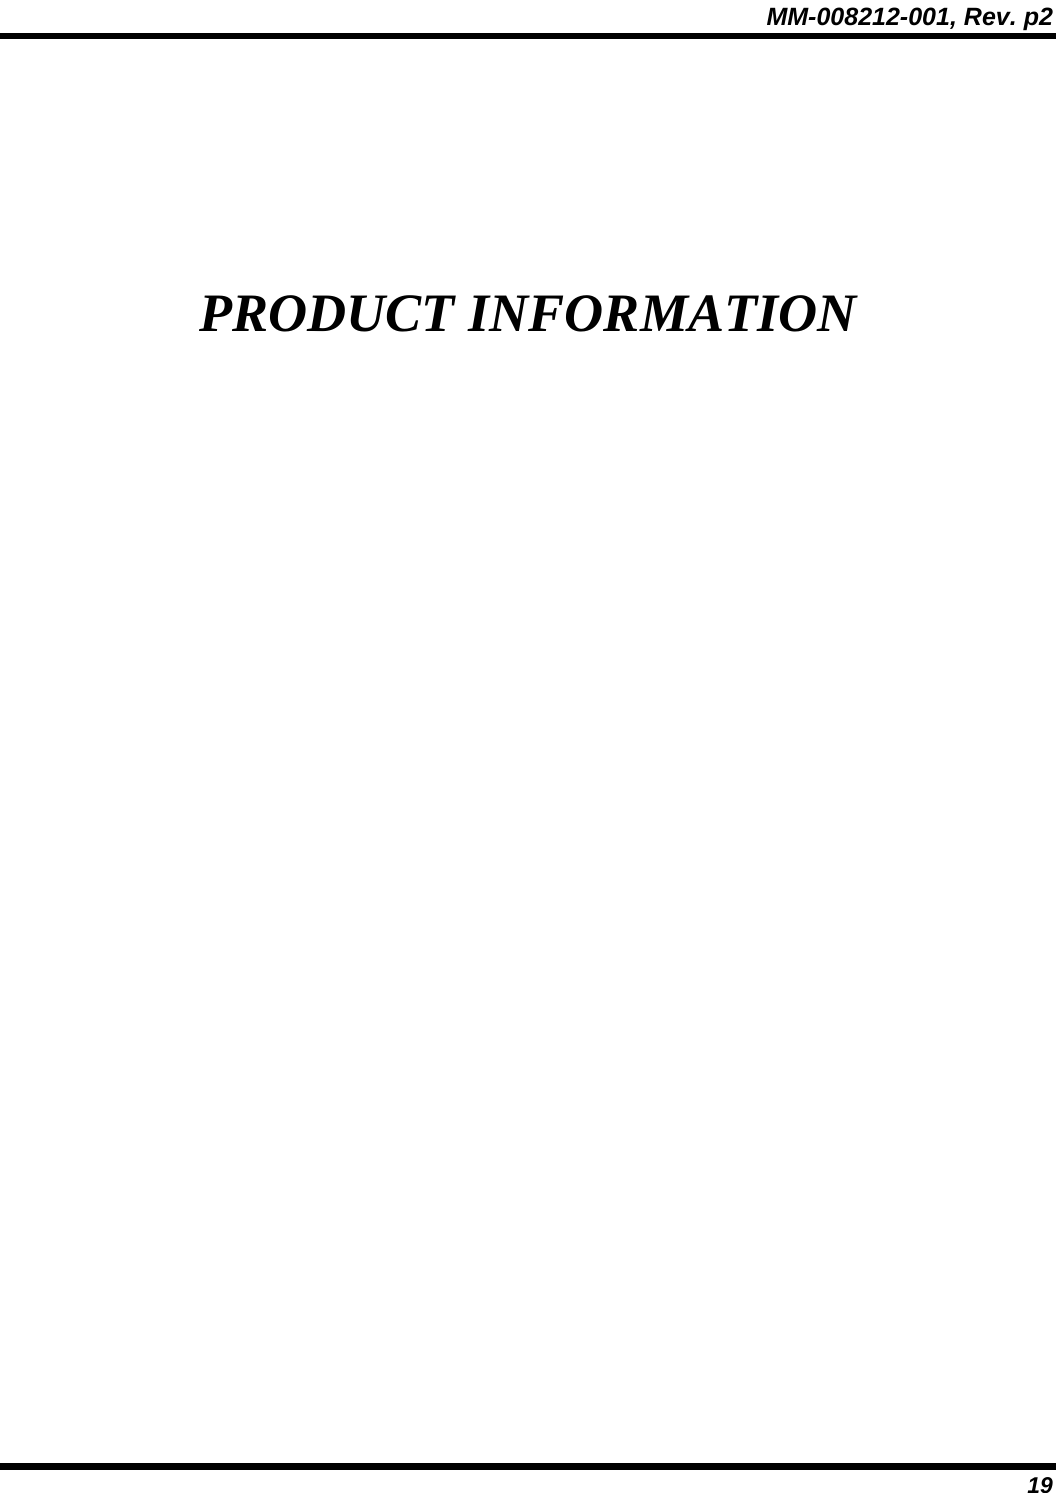 MM-008212-001, Rev. p2 19 PRODUCT INFORMATION 